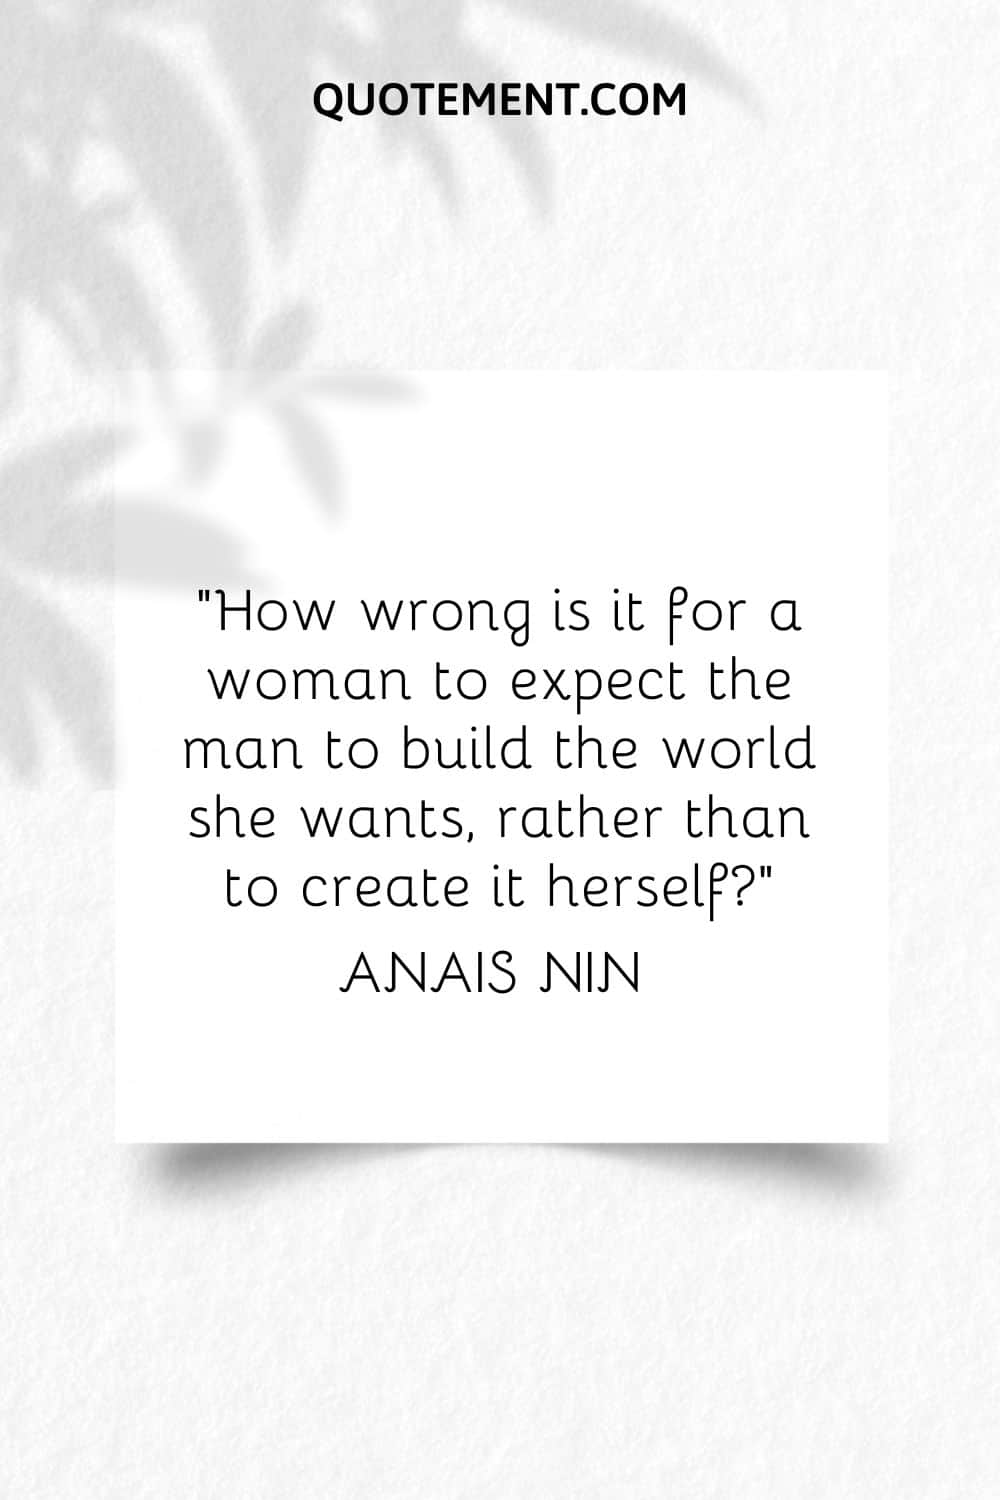 “How wrong is it for a woman to expect the man to build the world she wants, rather than to create it herself” ― Anais Nin